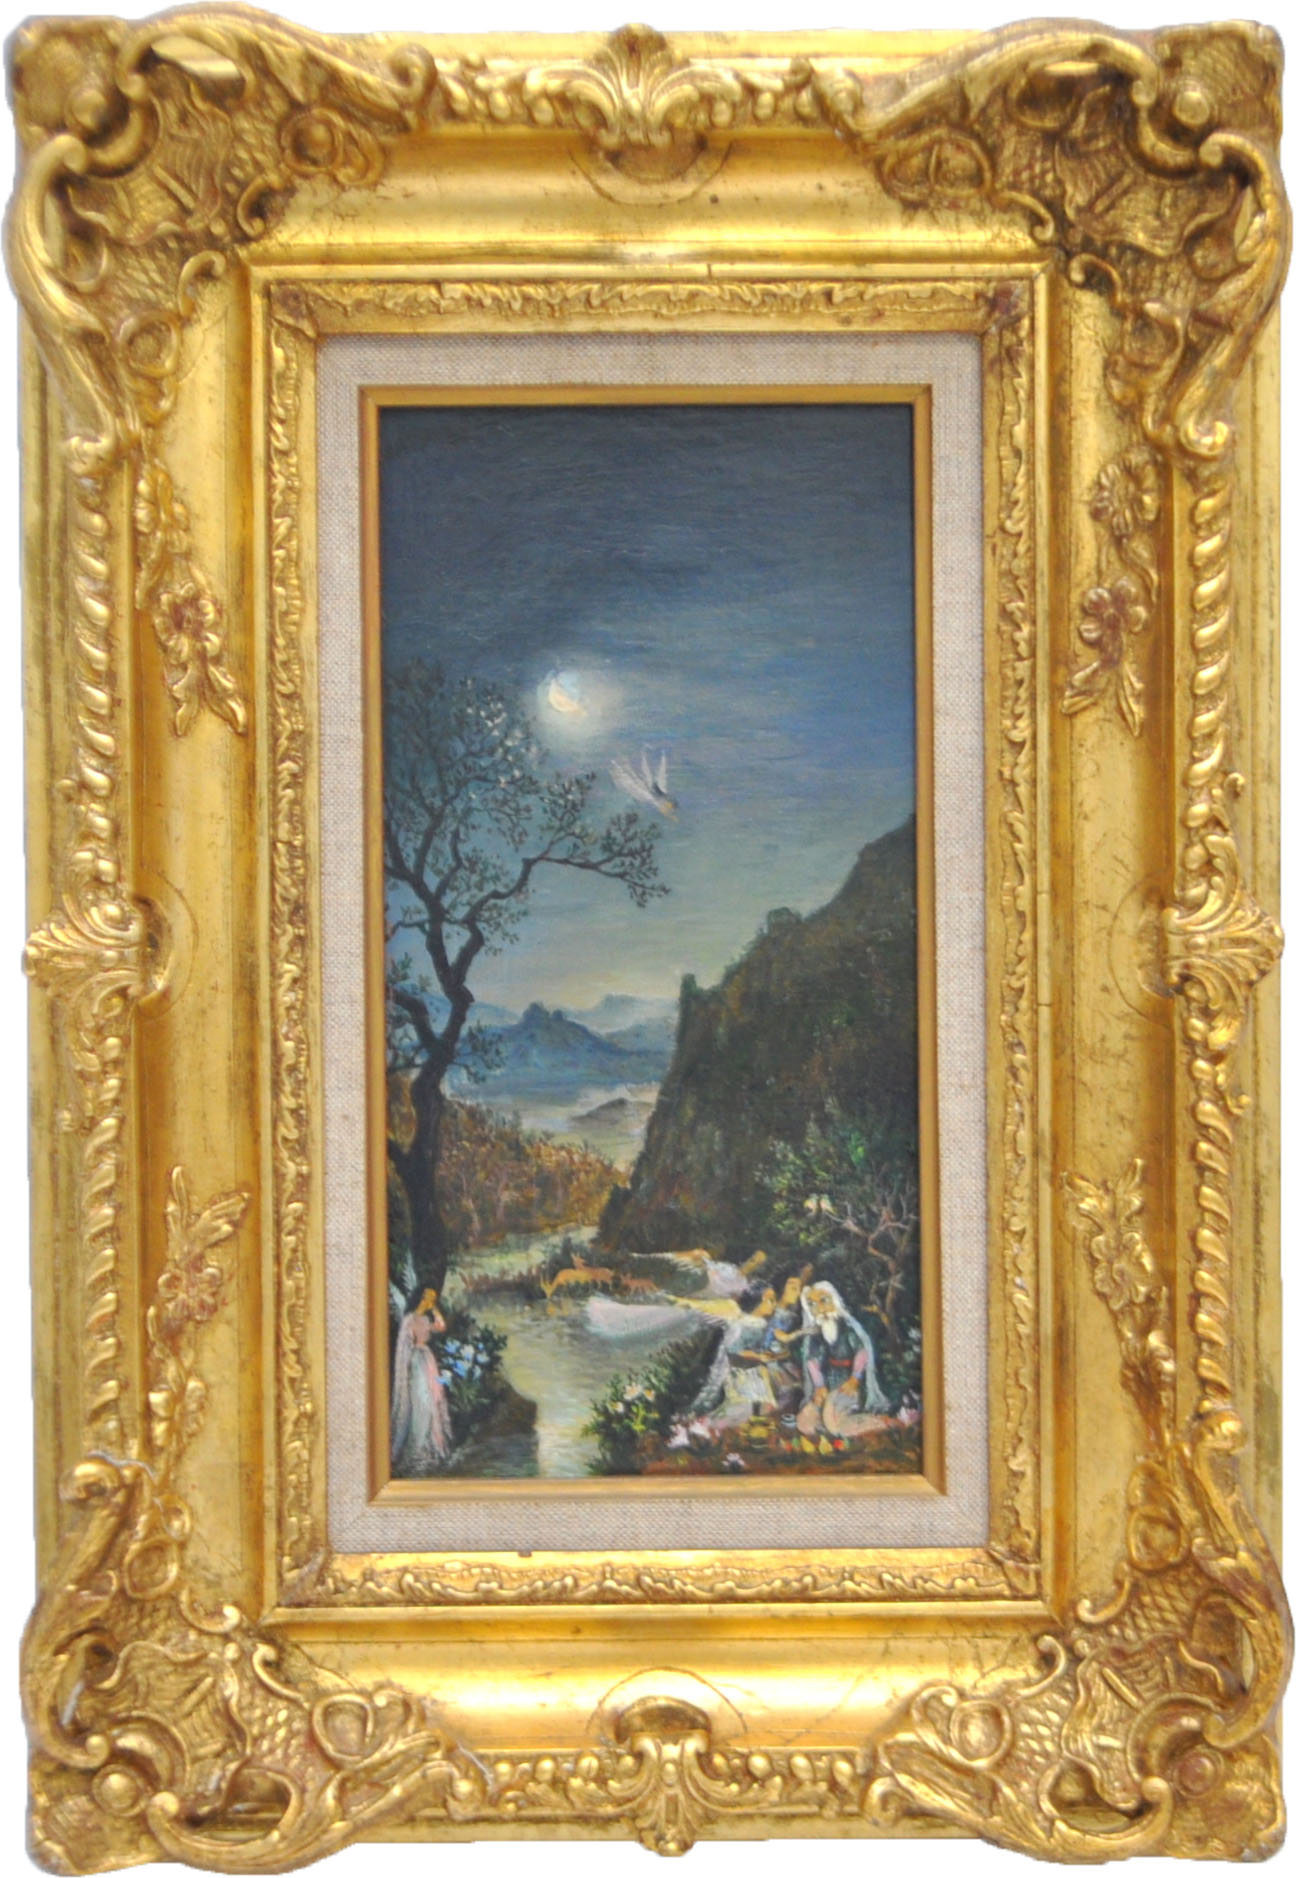 Jean Raffy Le Persan (French. 1920-2008) Surrealist painting, ‘Reveries II,’ frame measures 12 x 17 x 2 inches. Estimate: $1,200-$1,600. Charleston Estate Auctions image